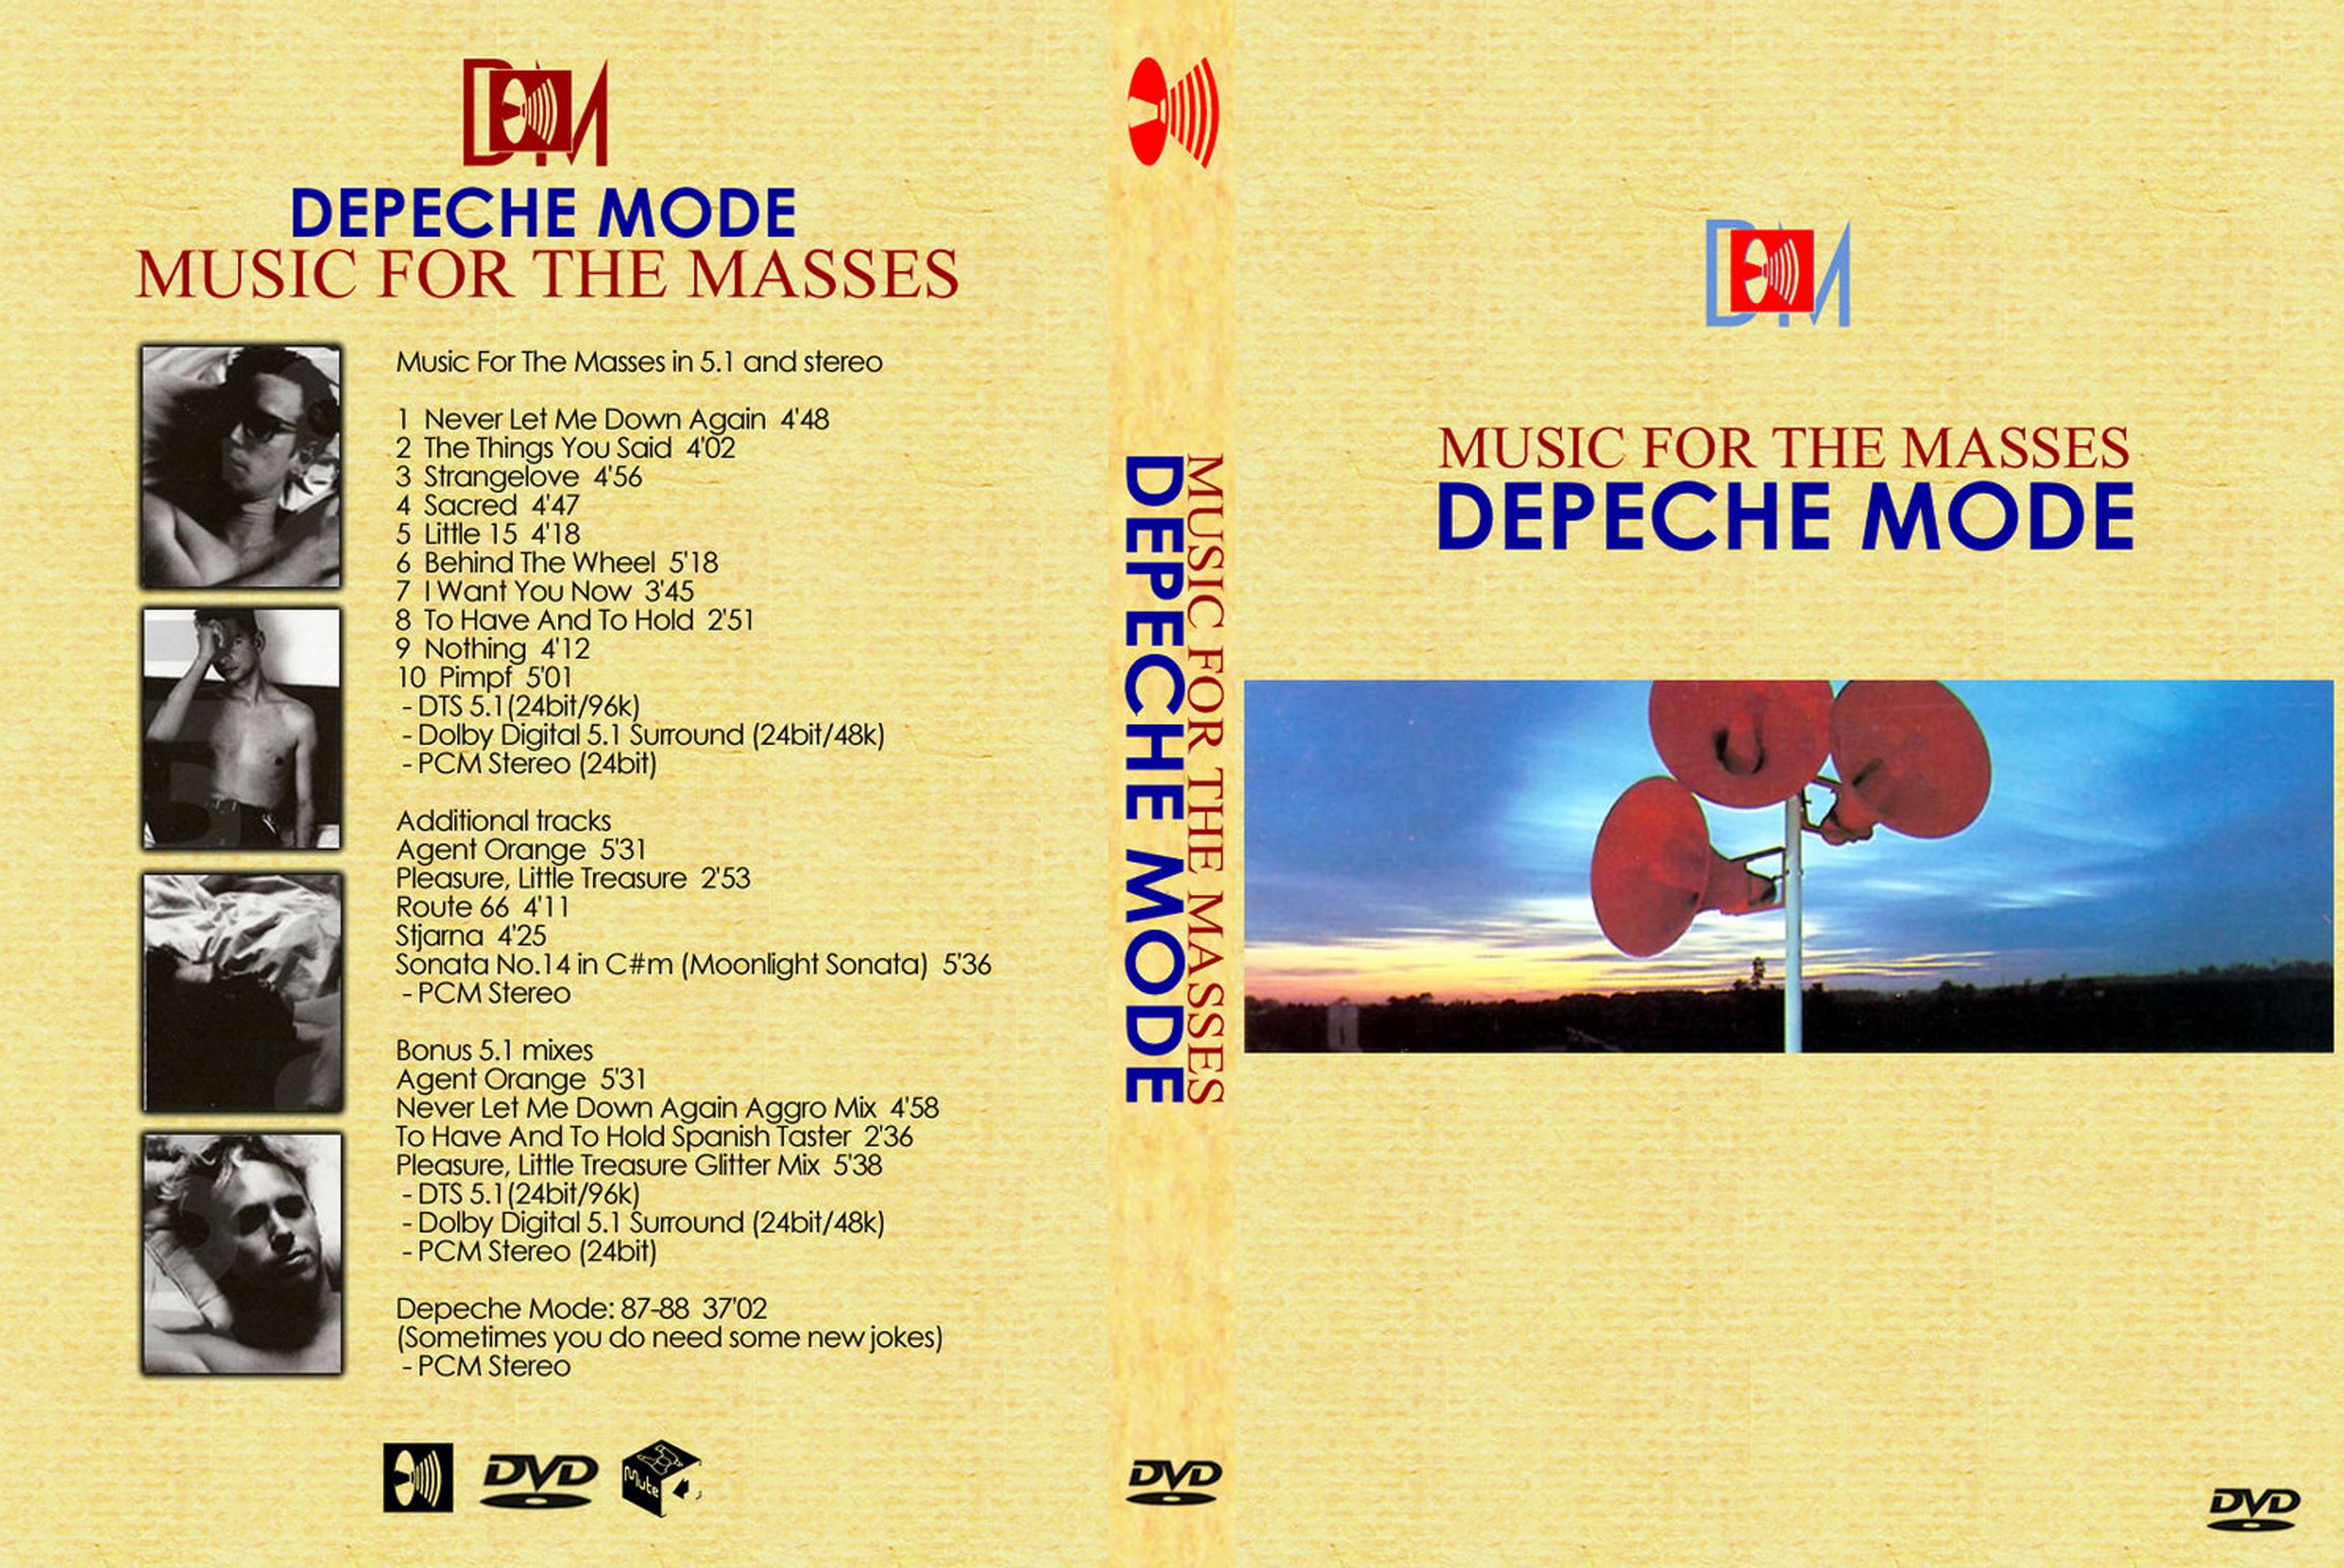 Jaquette DVD Depeche Mode Music for the masses